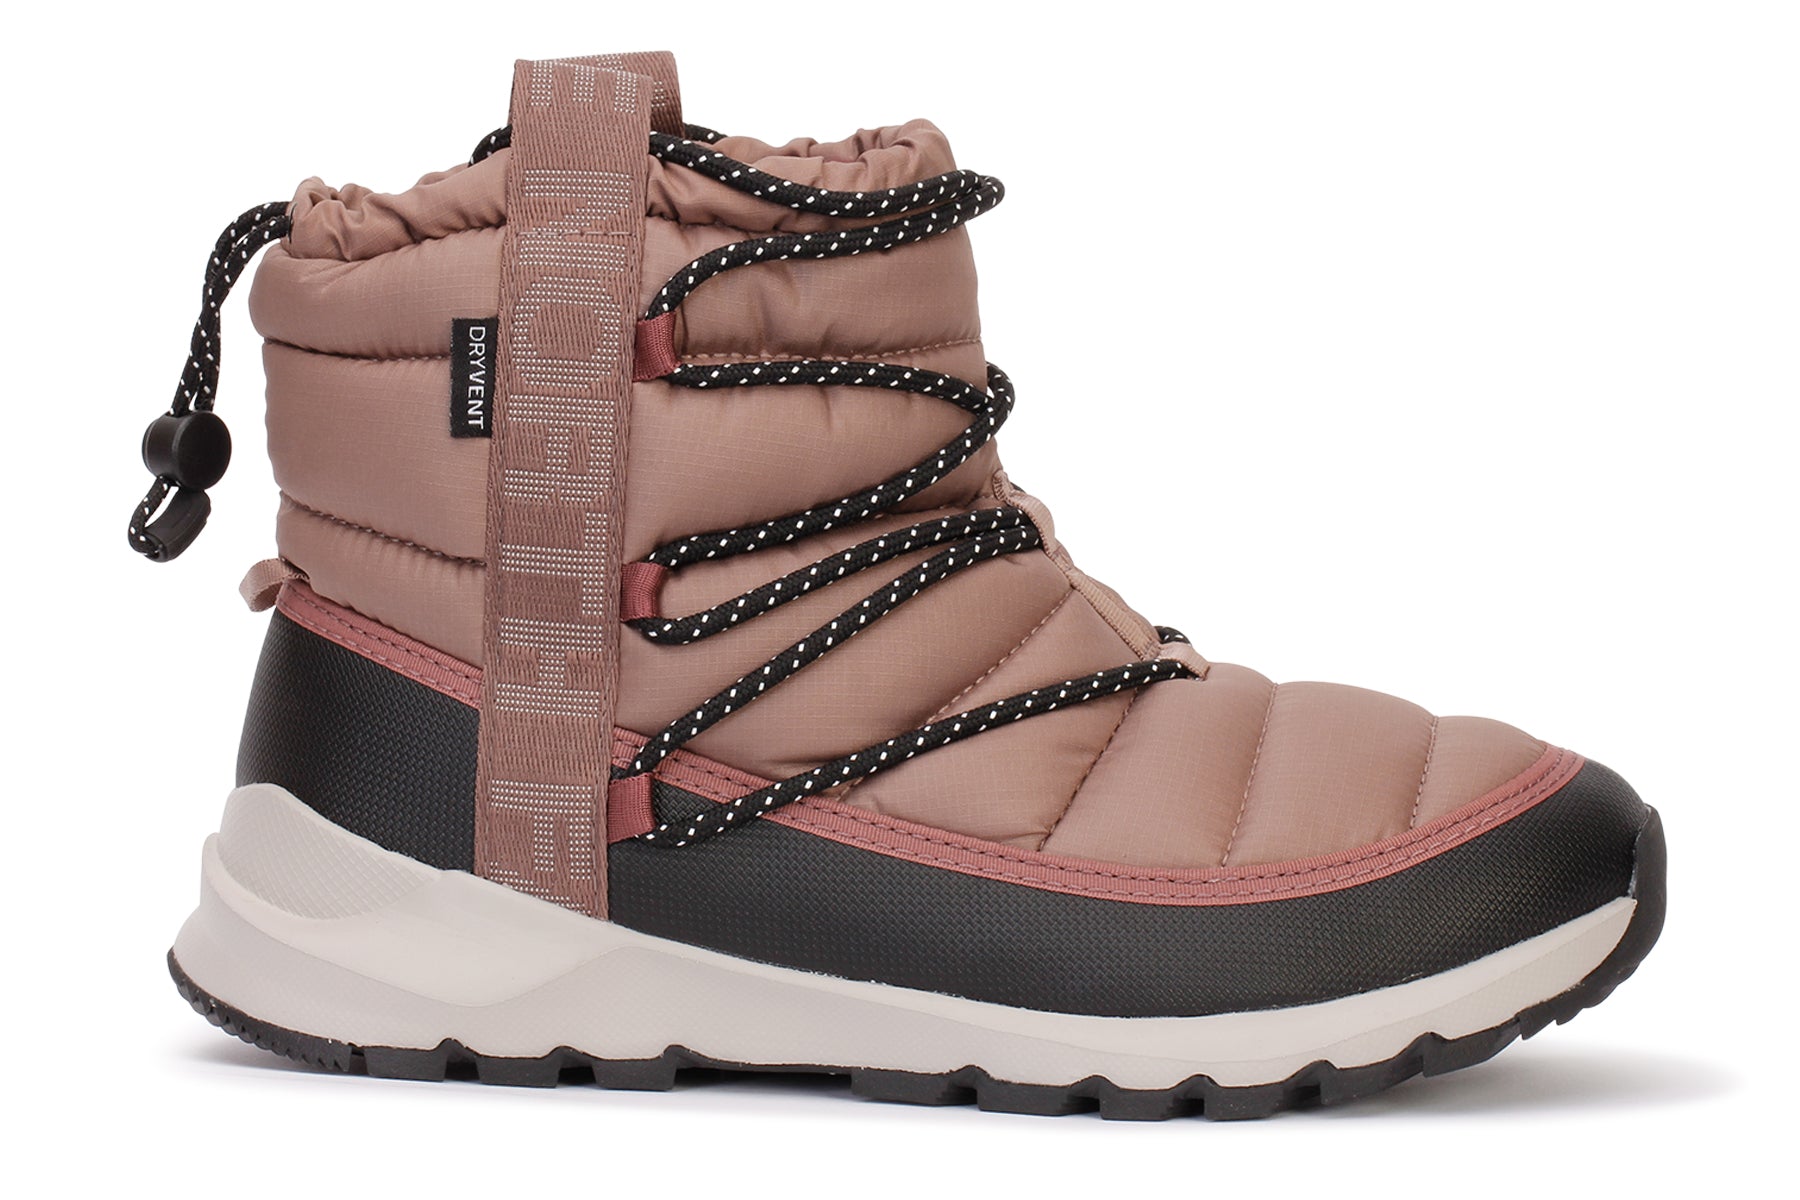 Women's Thermoball Lace Up Waterproof Boots